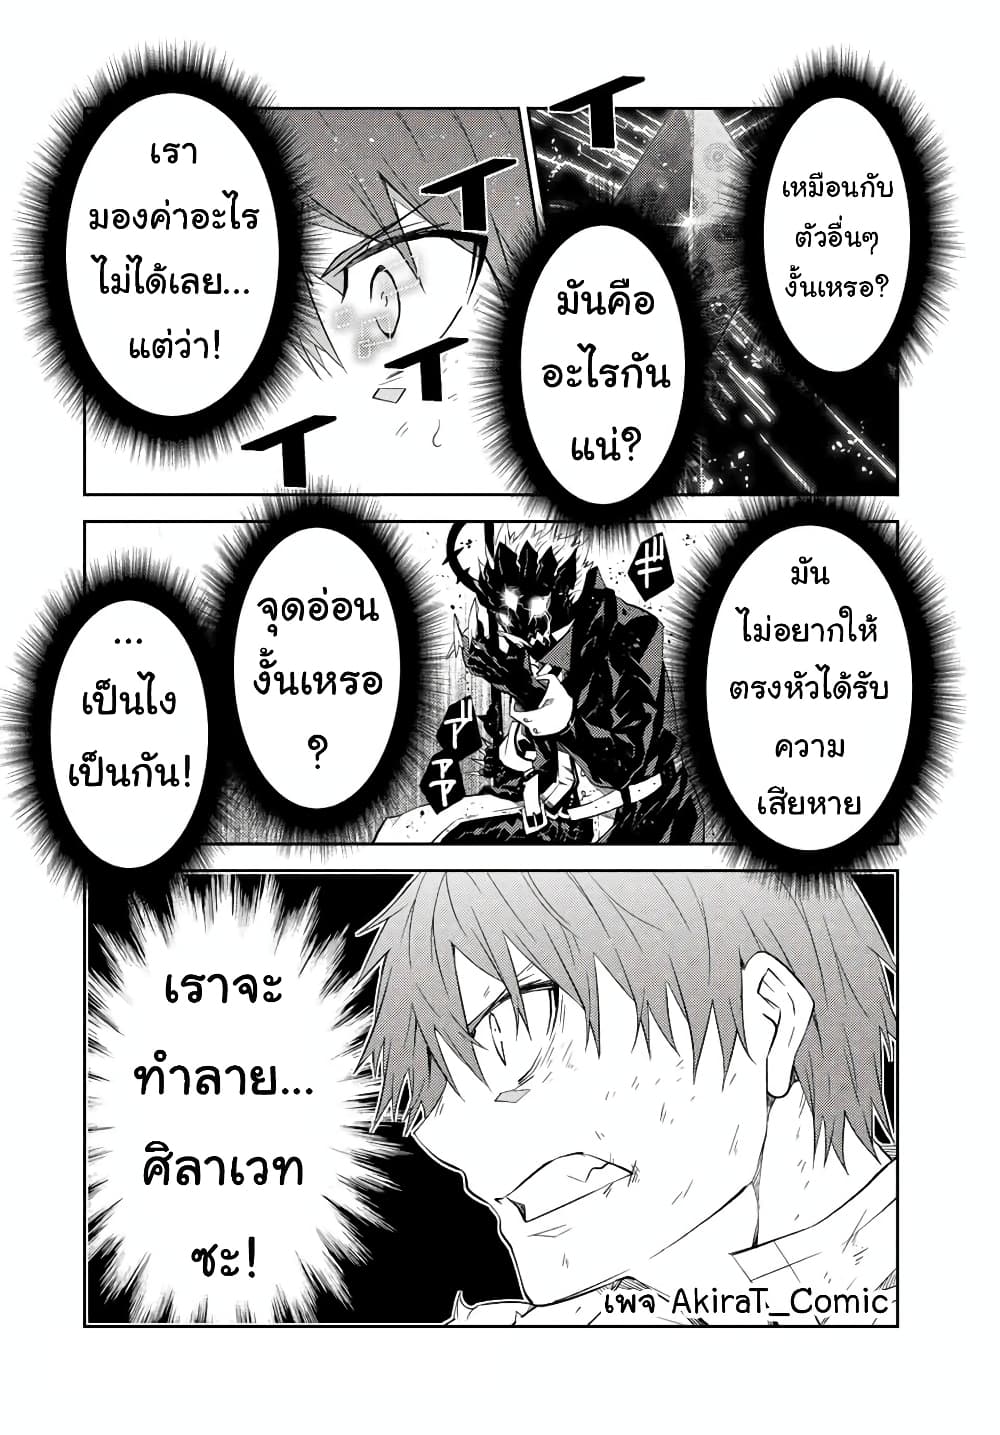 The Weakest Occupation "Blacksmith", but It's Actually the Strongest ช่างตีเหล็กอาชีพกระจอก? 57-57